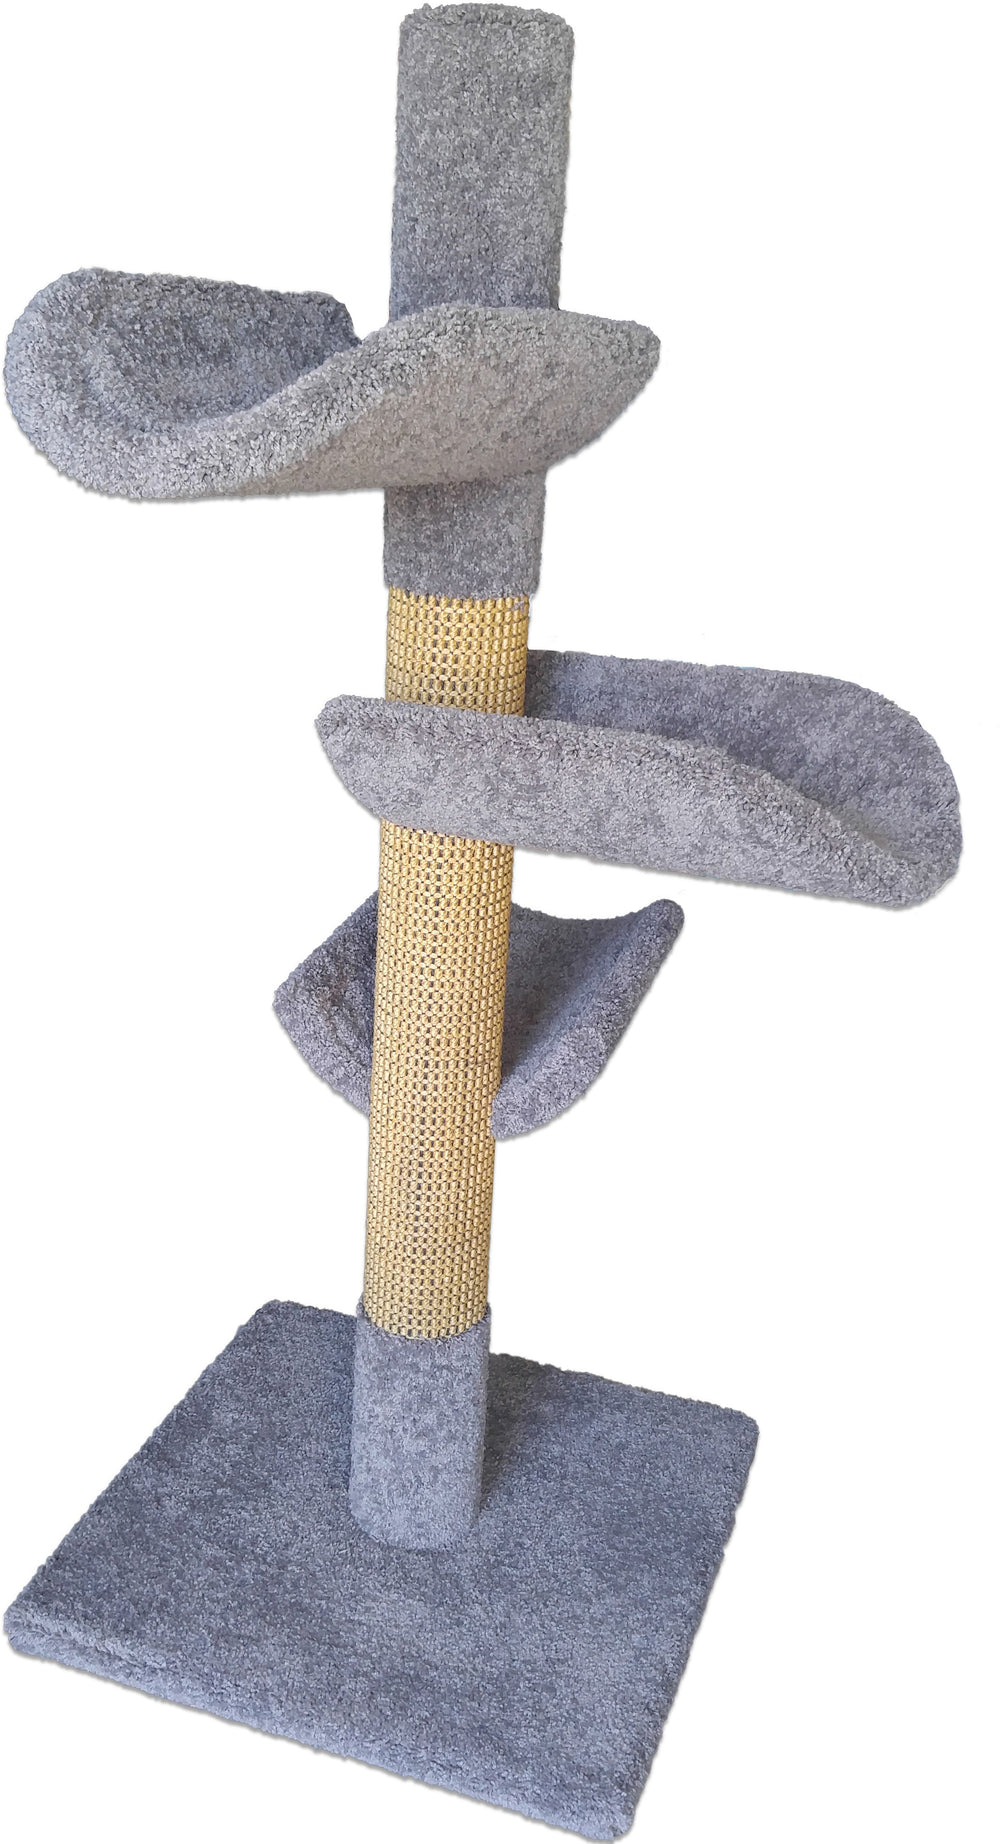 Play Perch Triplex Cat Tower with 3 Cat Perch